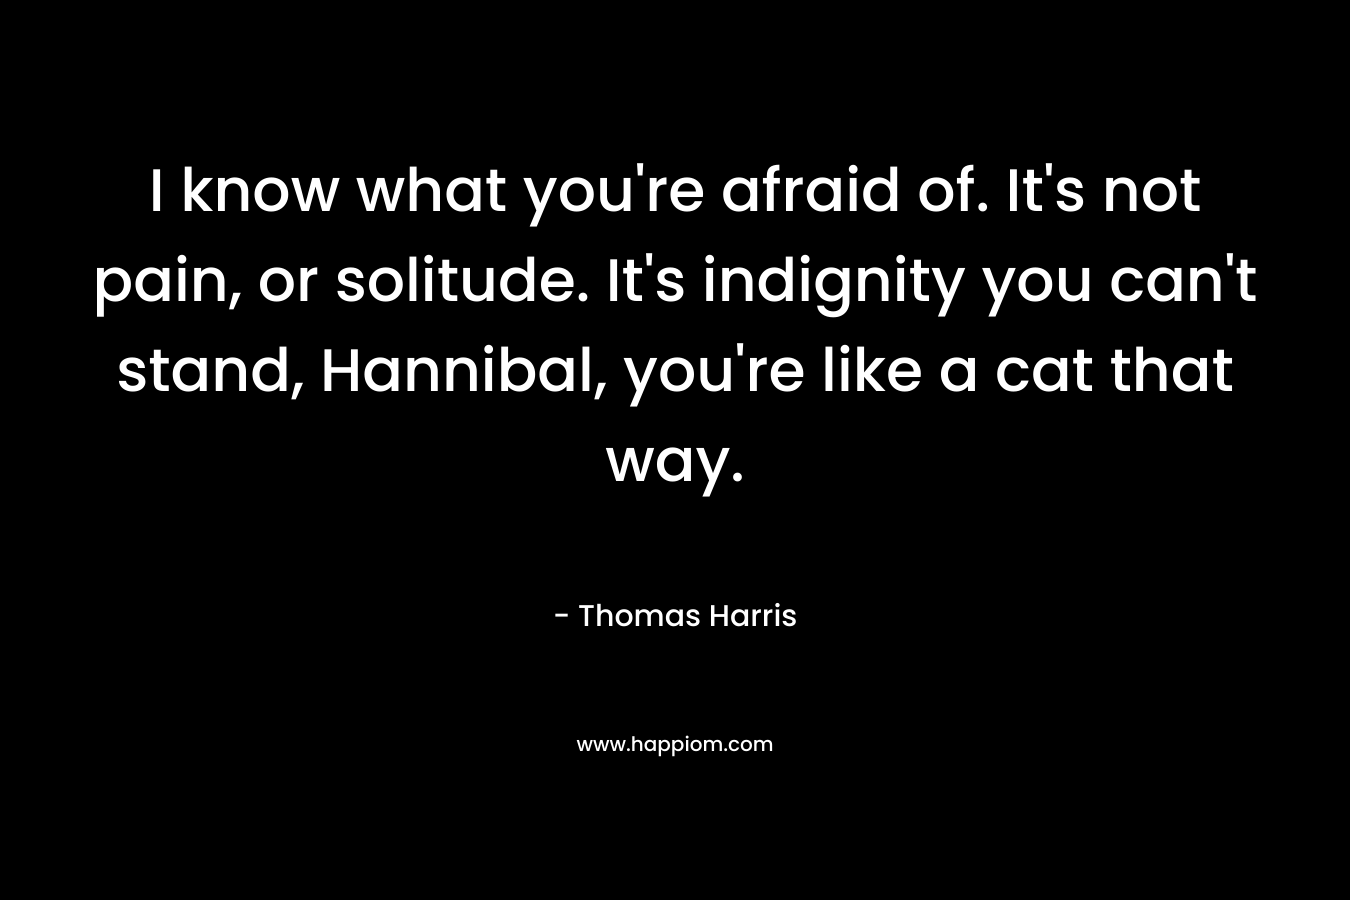 I know what you’re afraid of. It’s not pain, or solitude. It’s indignity you can’t stand, Hannibal, you’re like a cat that way. – Thomas Harris